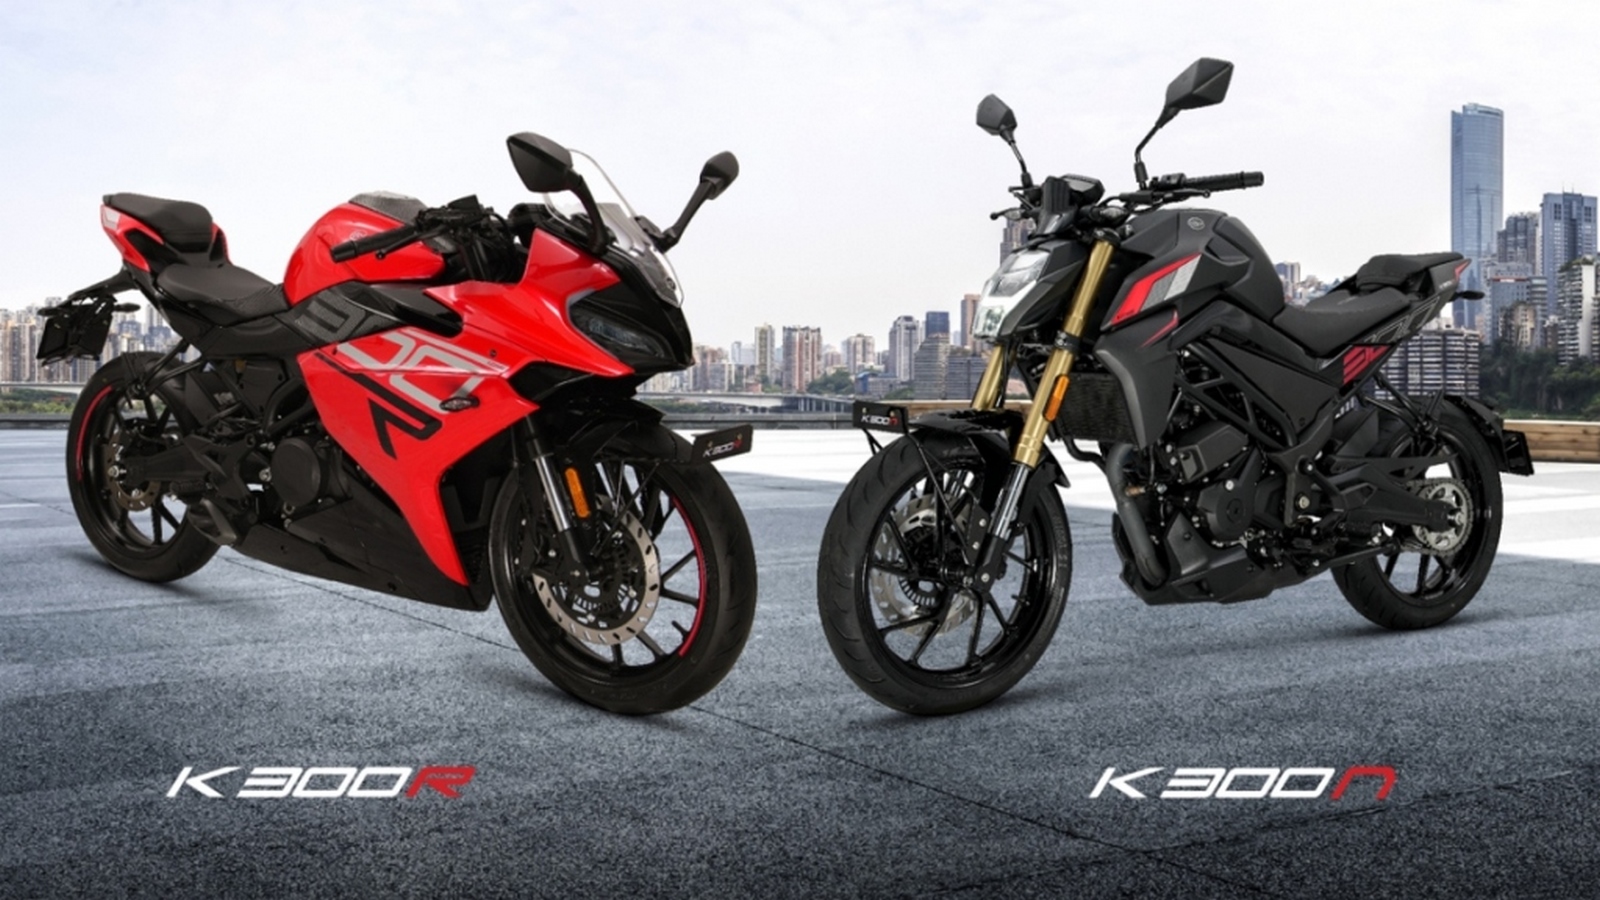 Keeway-K300-N-K300-R-launched-in-India_-Priced-from-Rs-2.65-lakh_Αντιγραφή.jpg